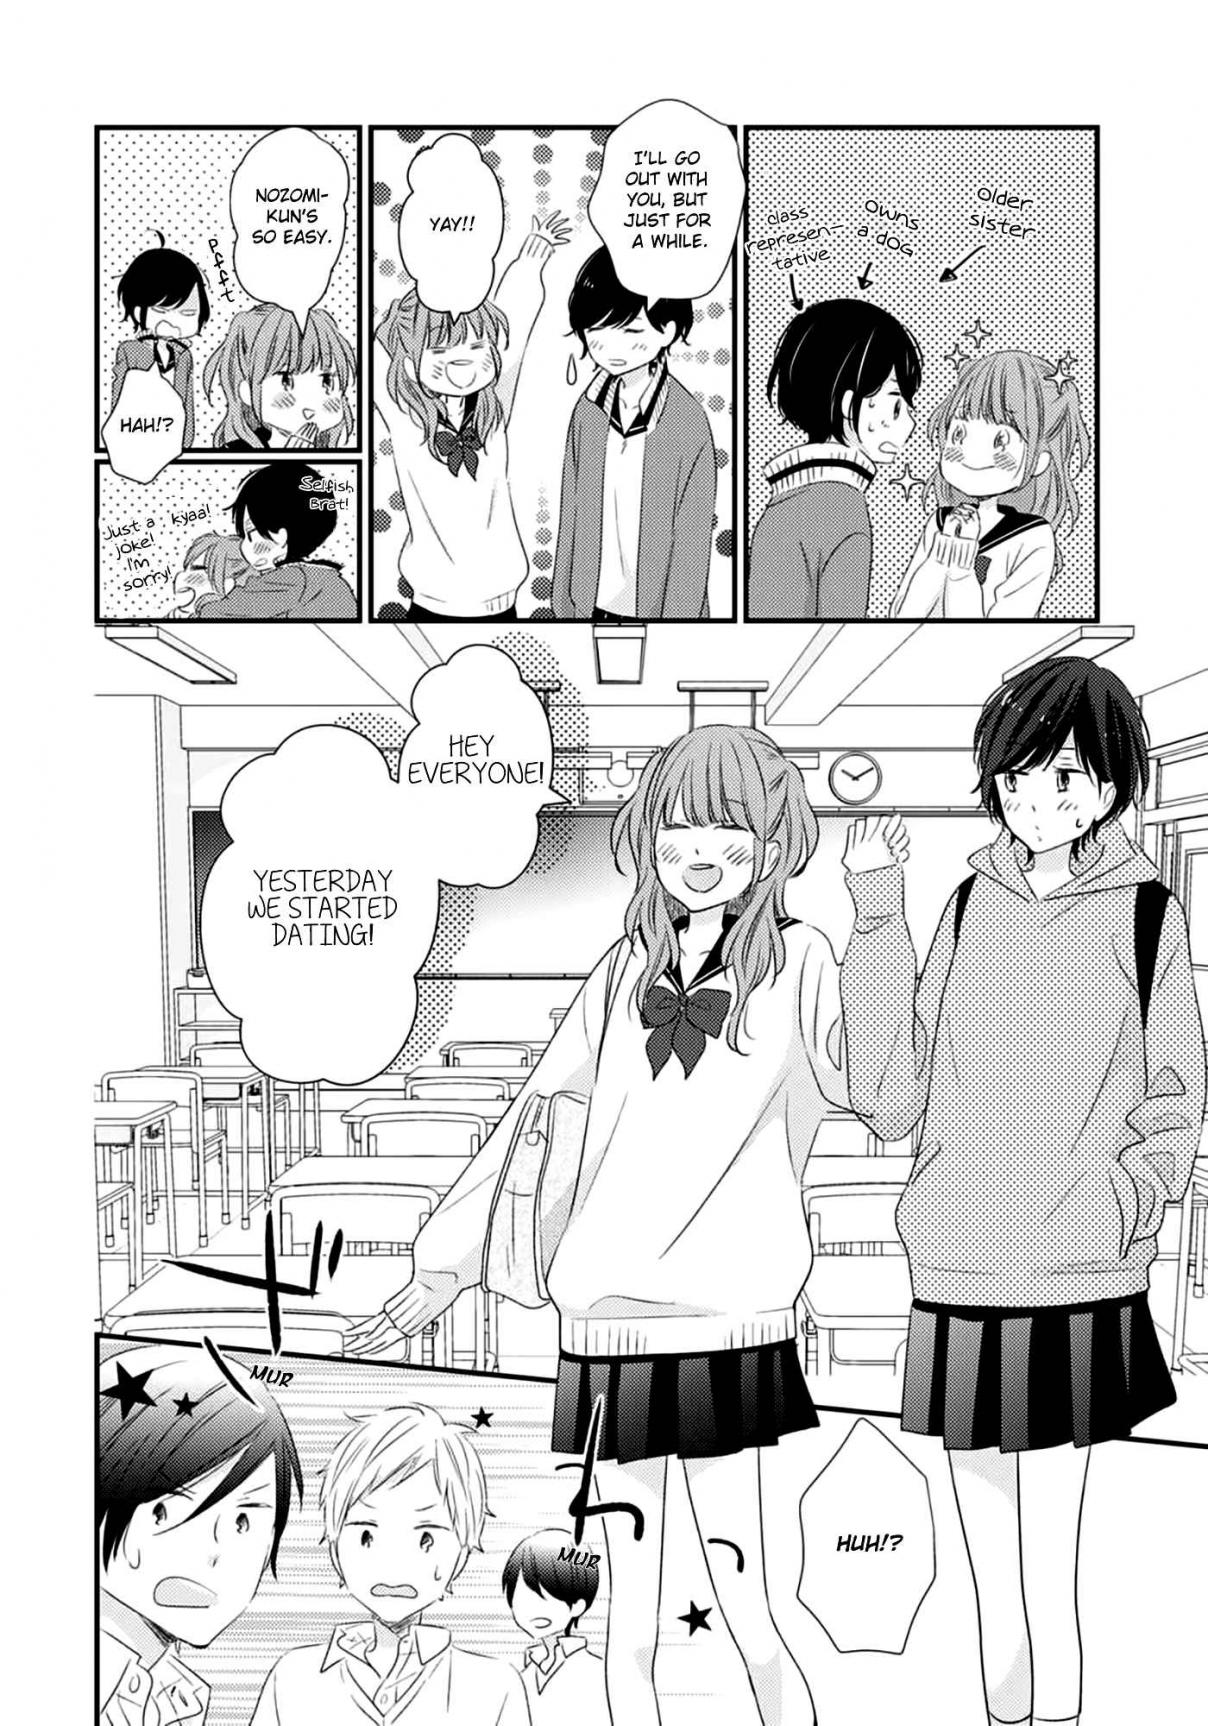 I Don't Know Why, but I Suddenly Wanted to Have Sex with My Coworker Who Sits Next to Me Vol. 1 Ch. 2 Bedroom Telepathy